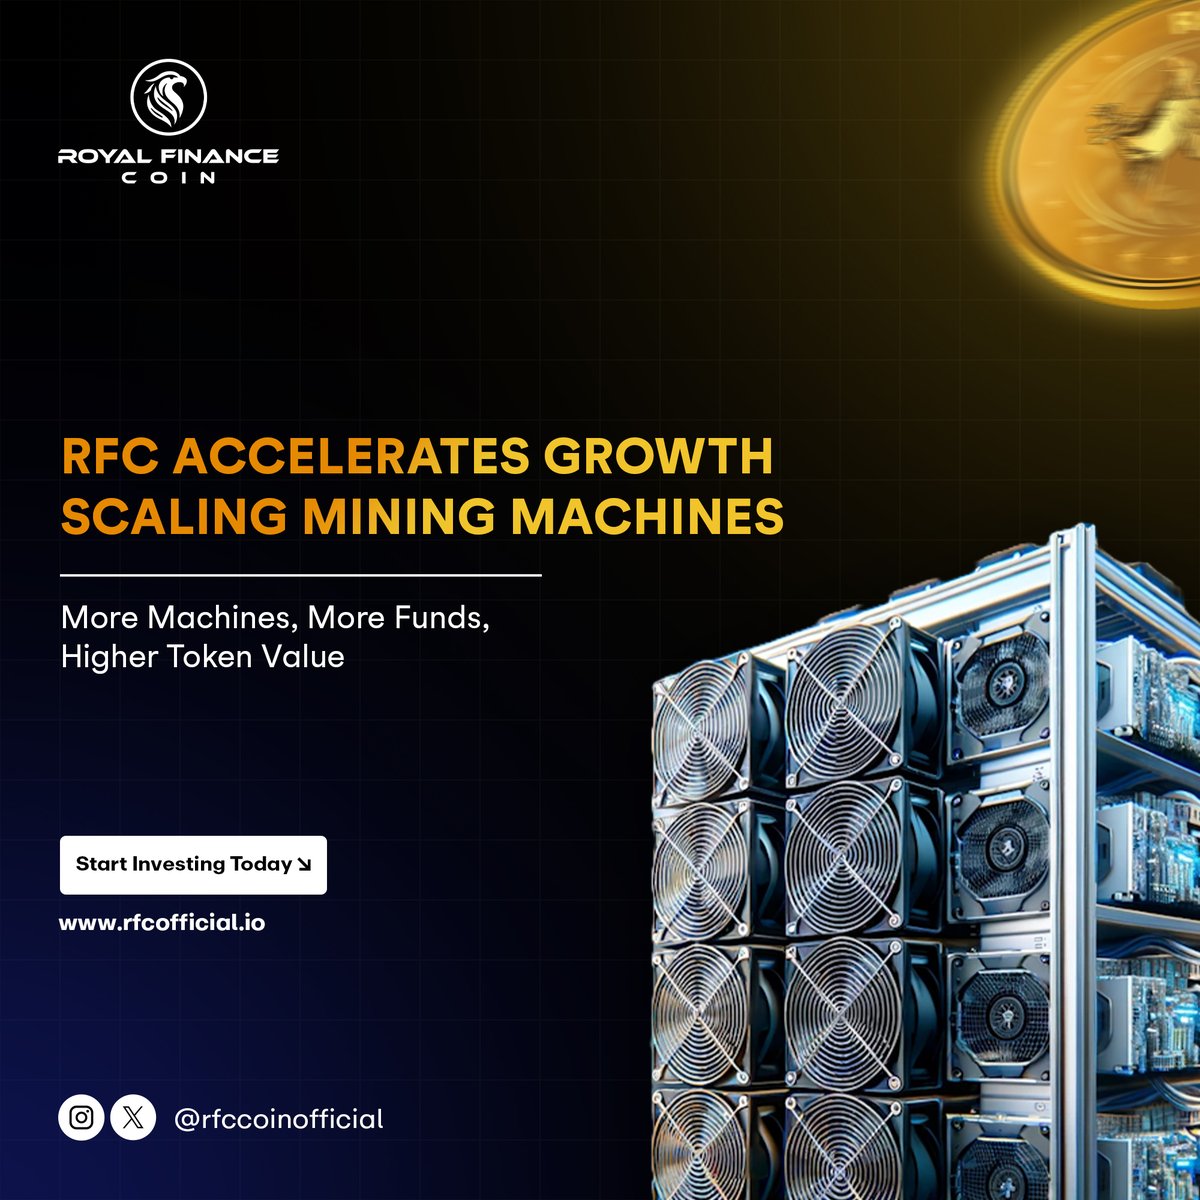 📈 RFC Accelerates Growth | Scaling Mining Operations

🔹 More Machines | More Funds | Higher Token Value
🔹 Amplifying Returns by Enhancing Token Value with Augmented Funding
🔹 Start Investing Today

🌐 rfcofficial.io 

#RFC #CryptoInvestment #HigherReturns